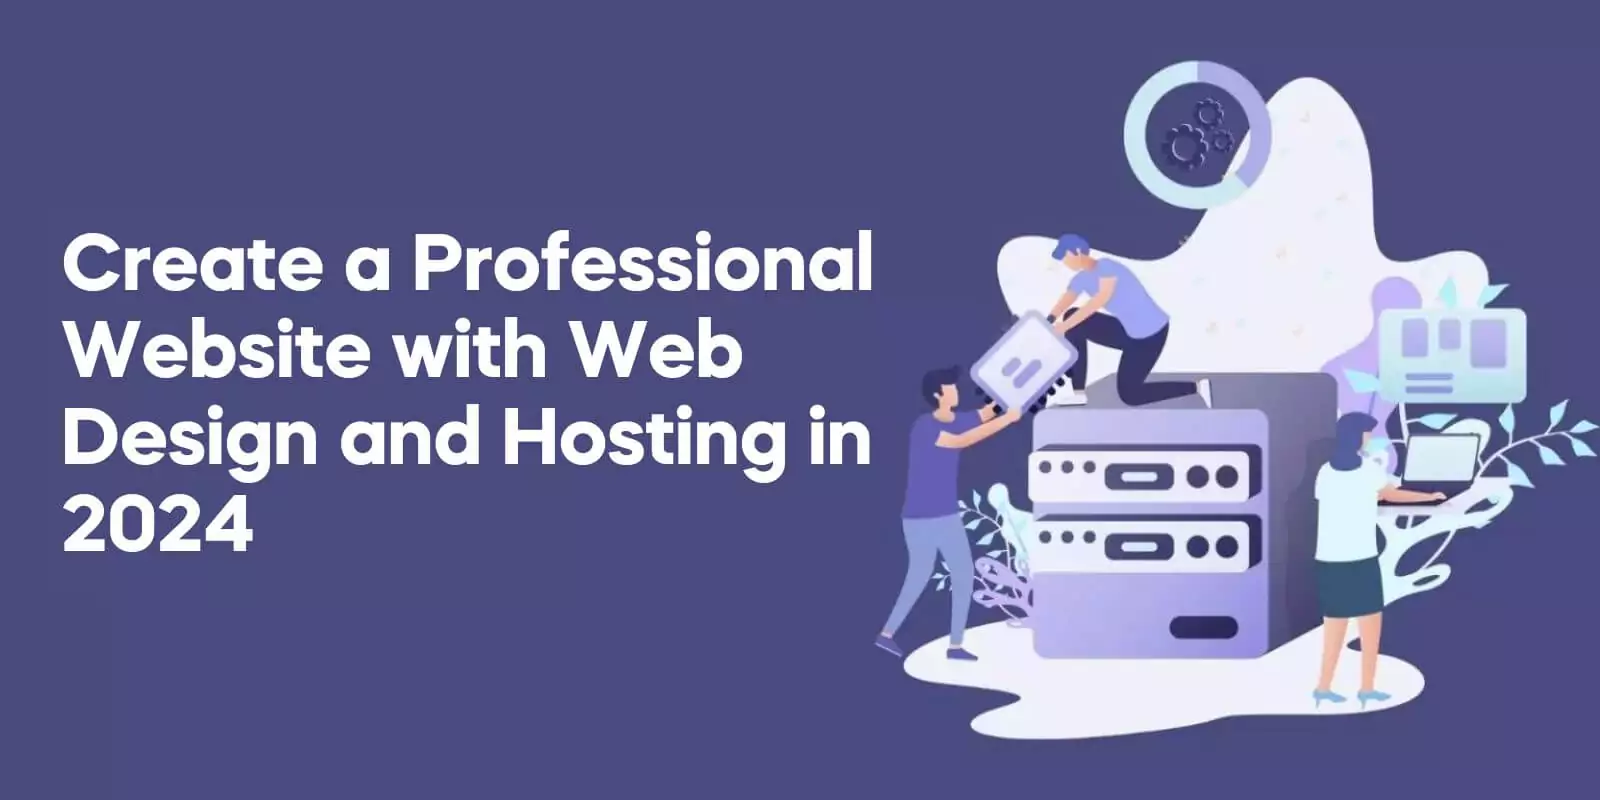 Create a Professional Website with Web Design and Hosting in 2024